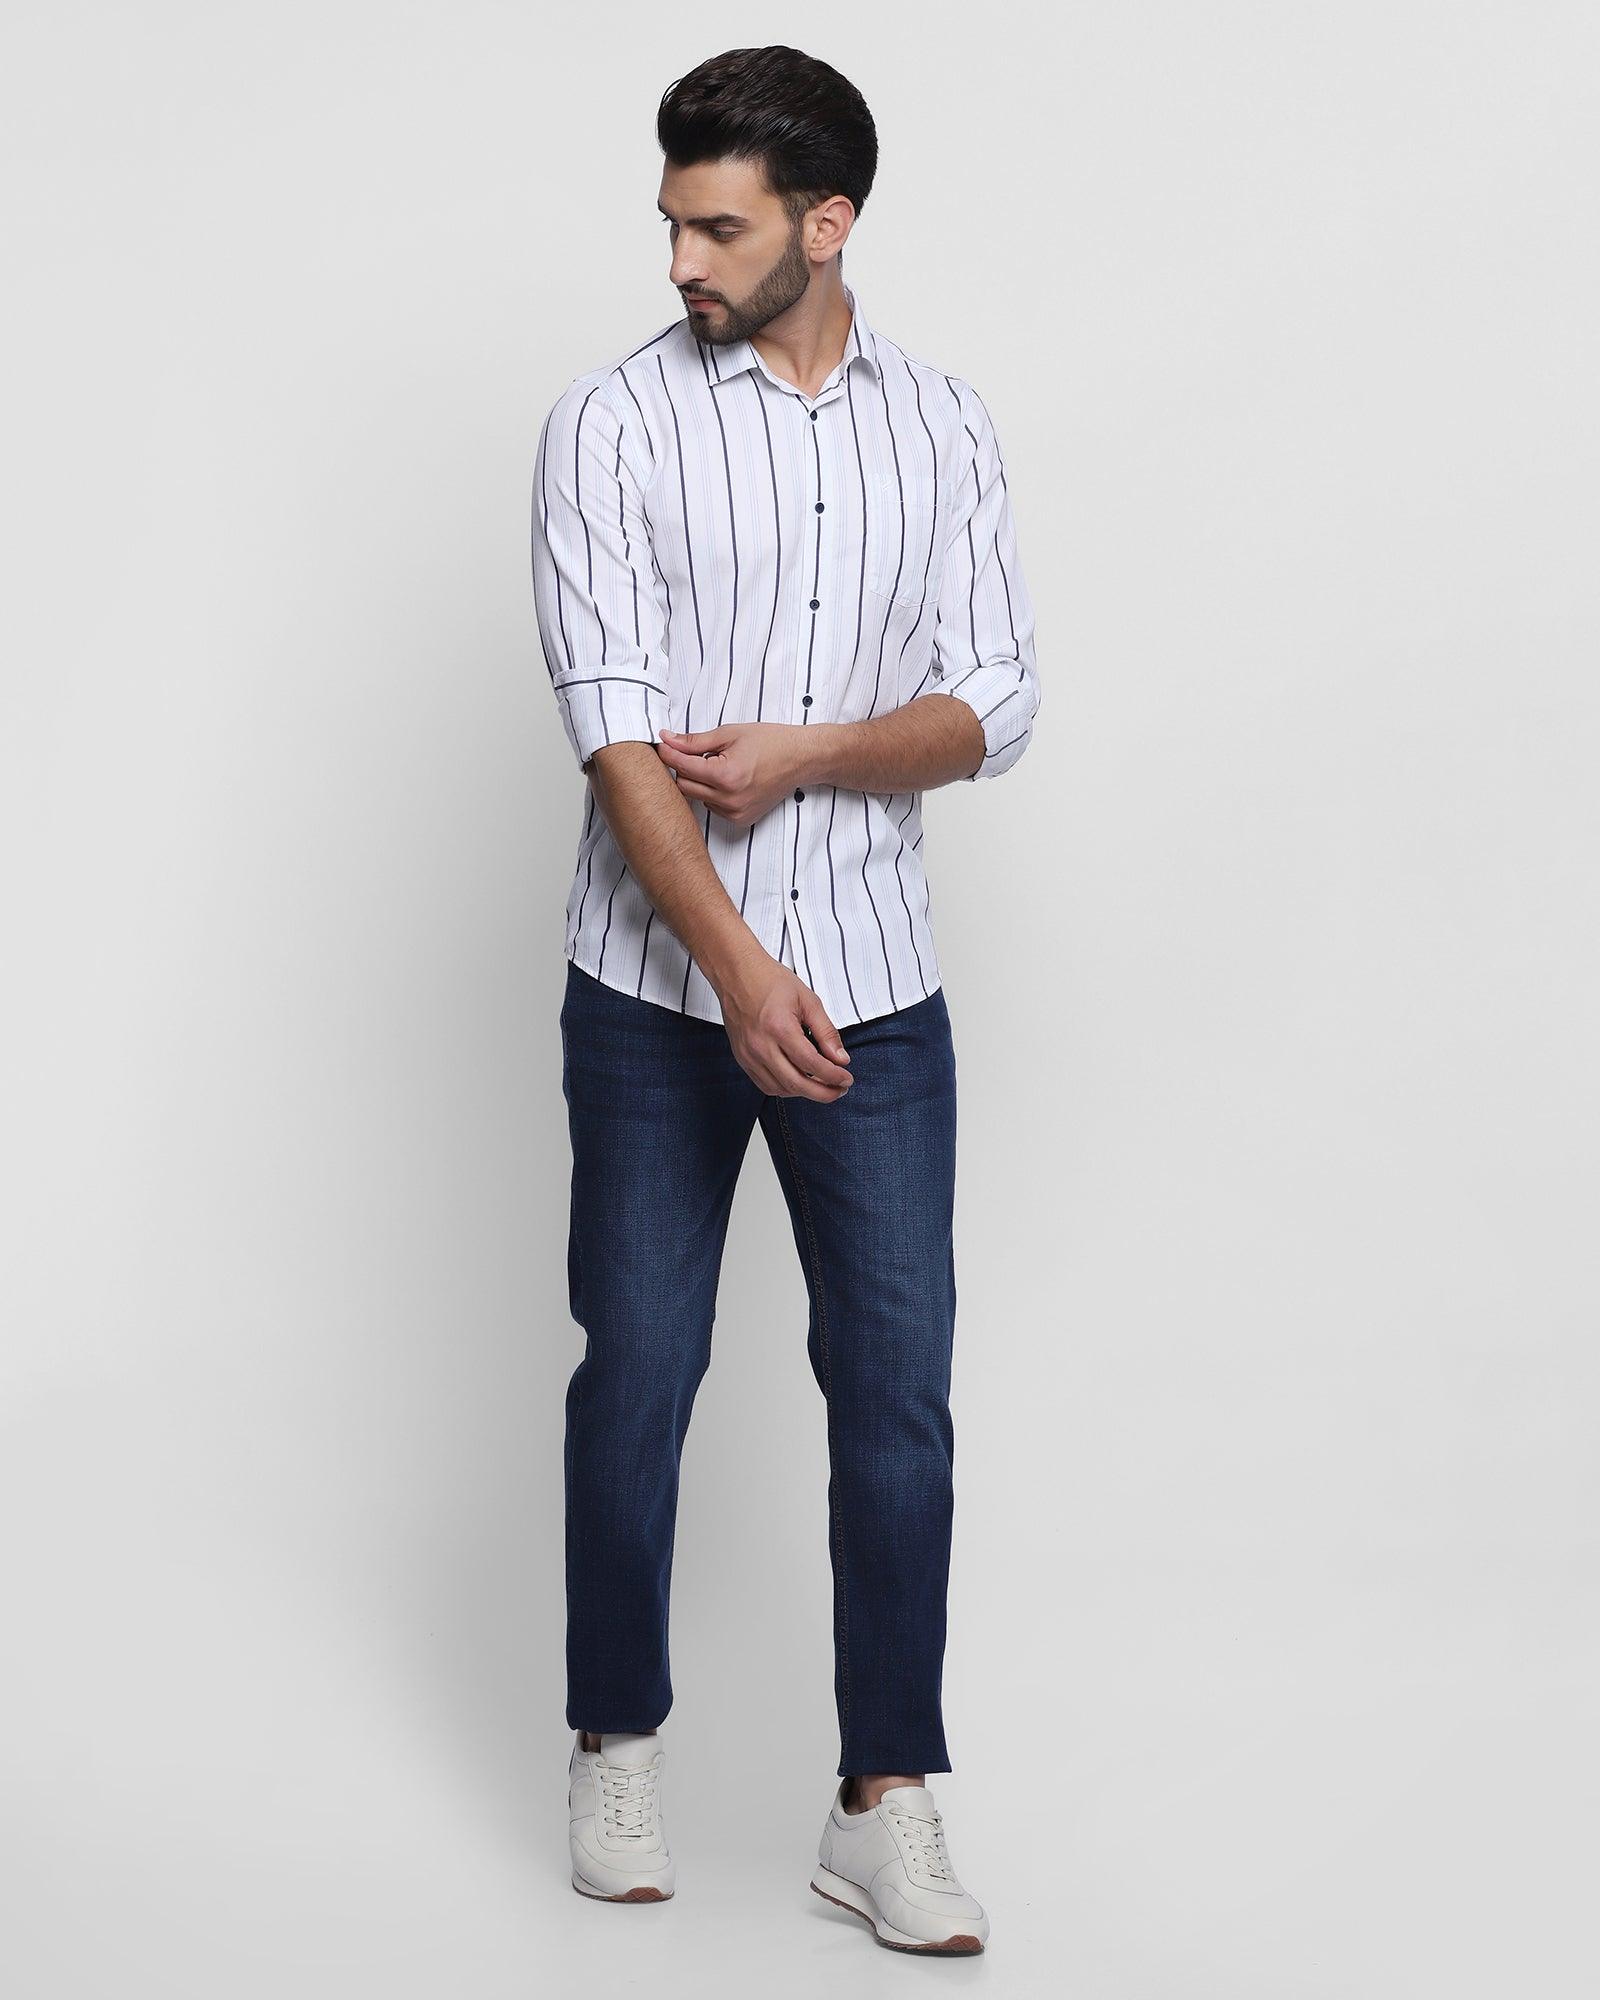 Casual White Striped Shirt - Play